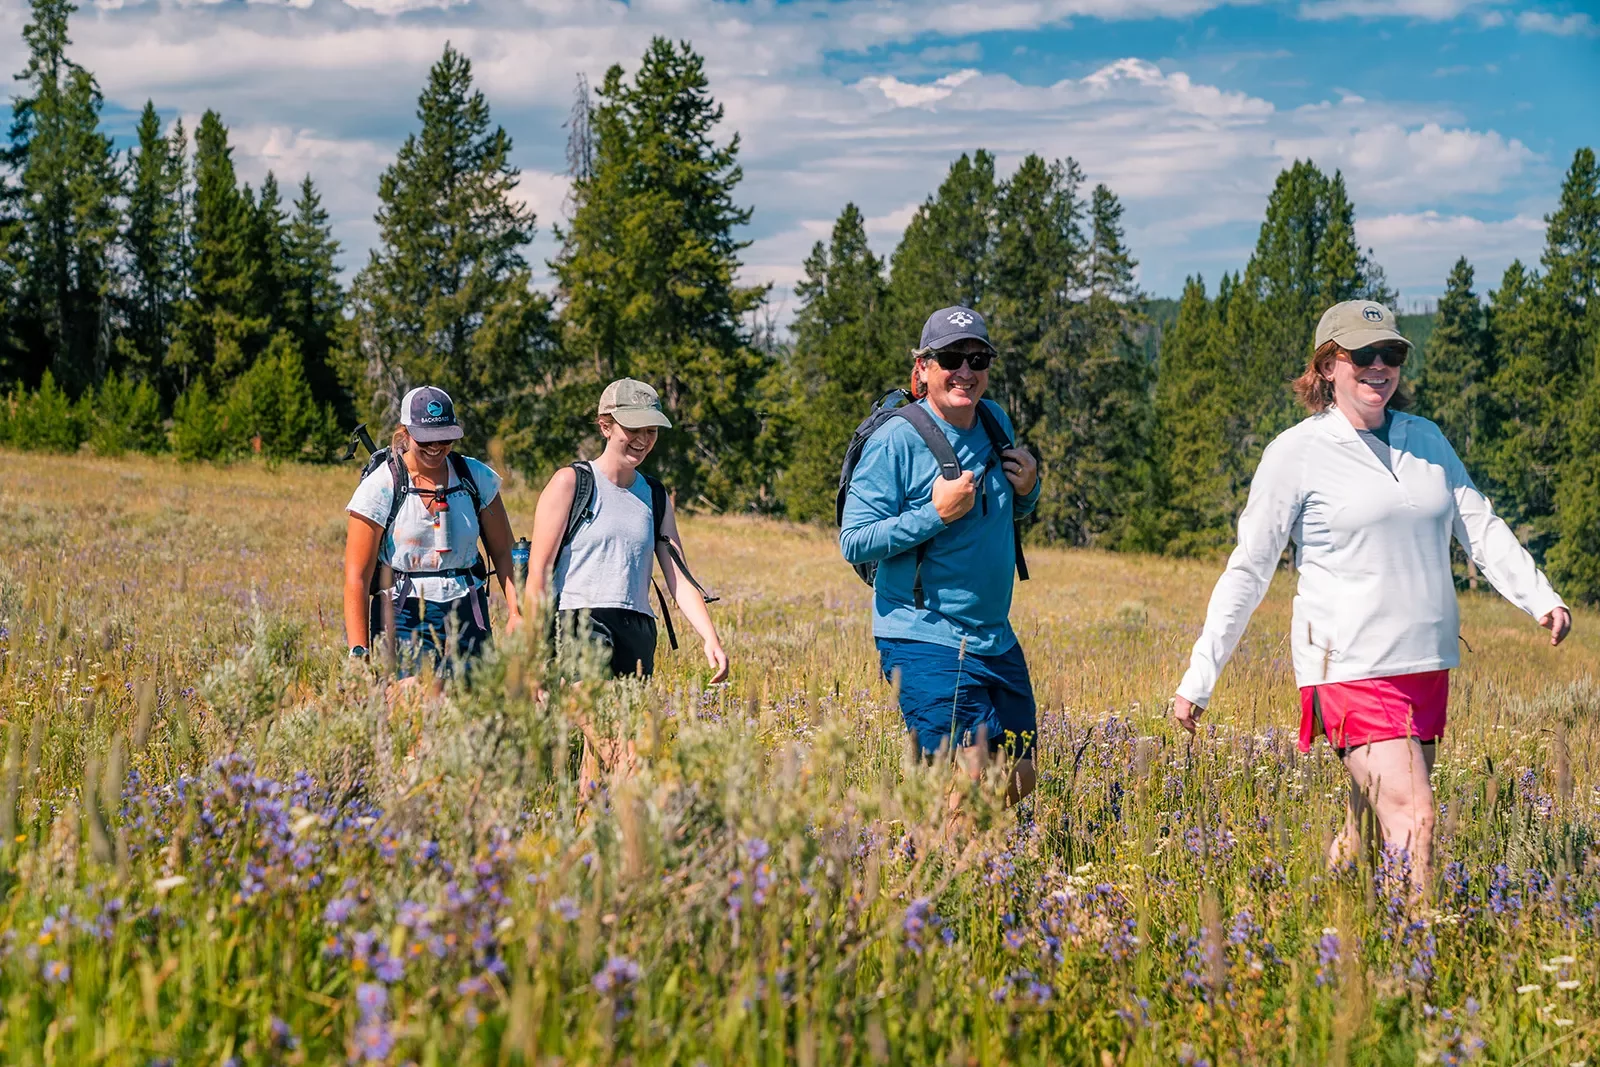 Backroads guests hiking through fields of lavender